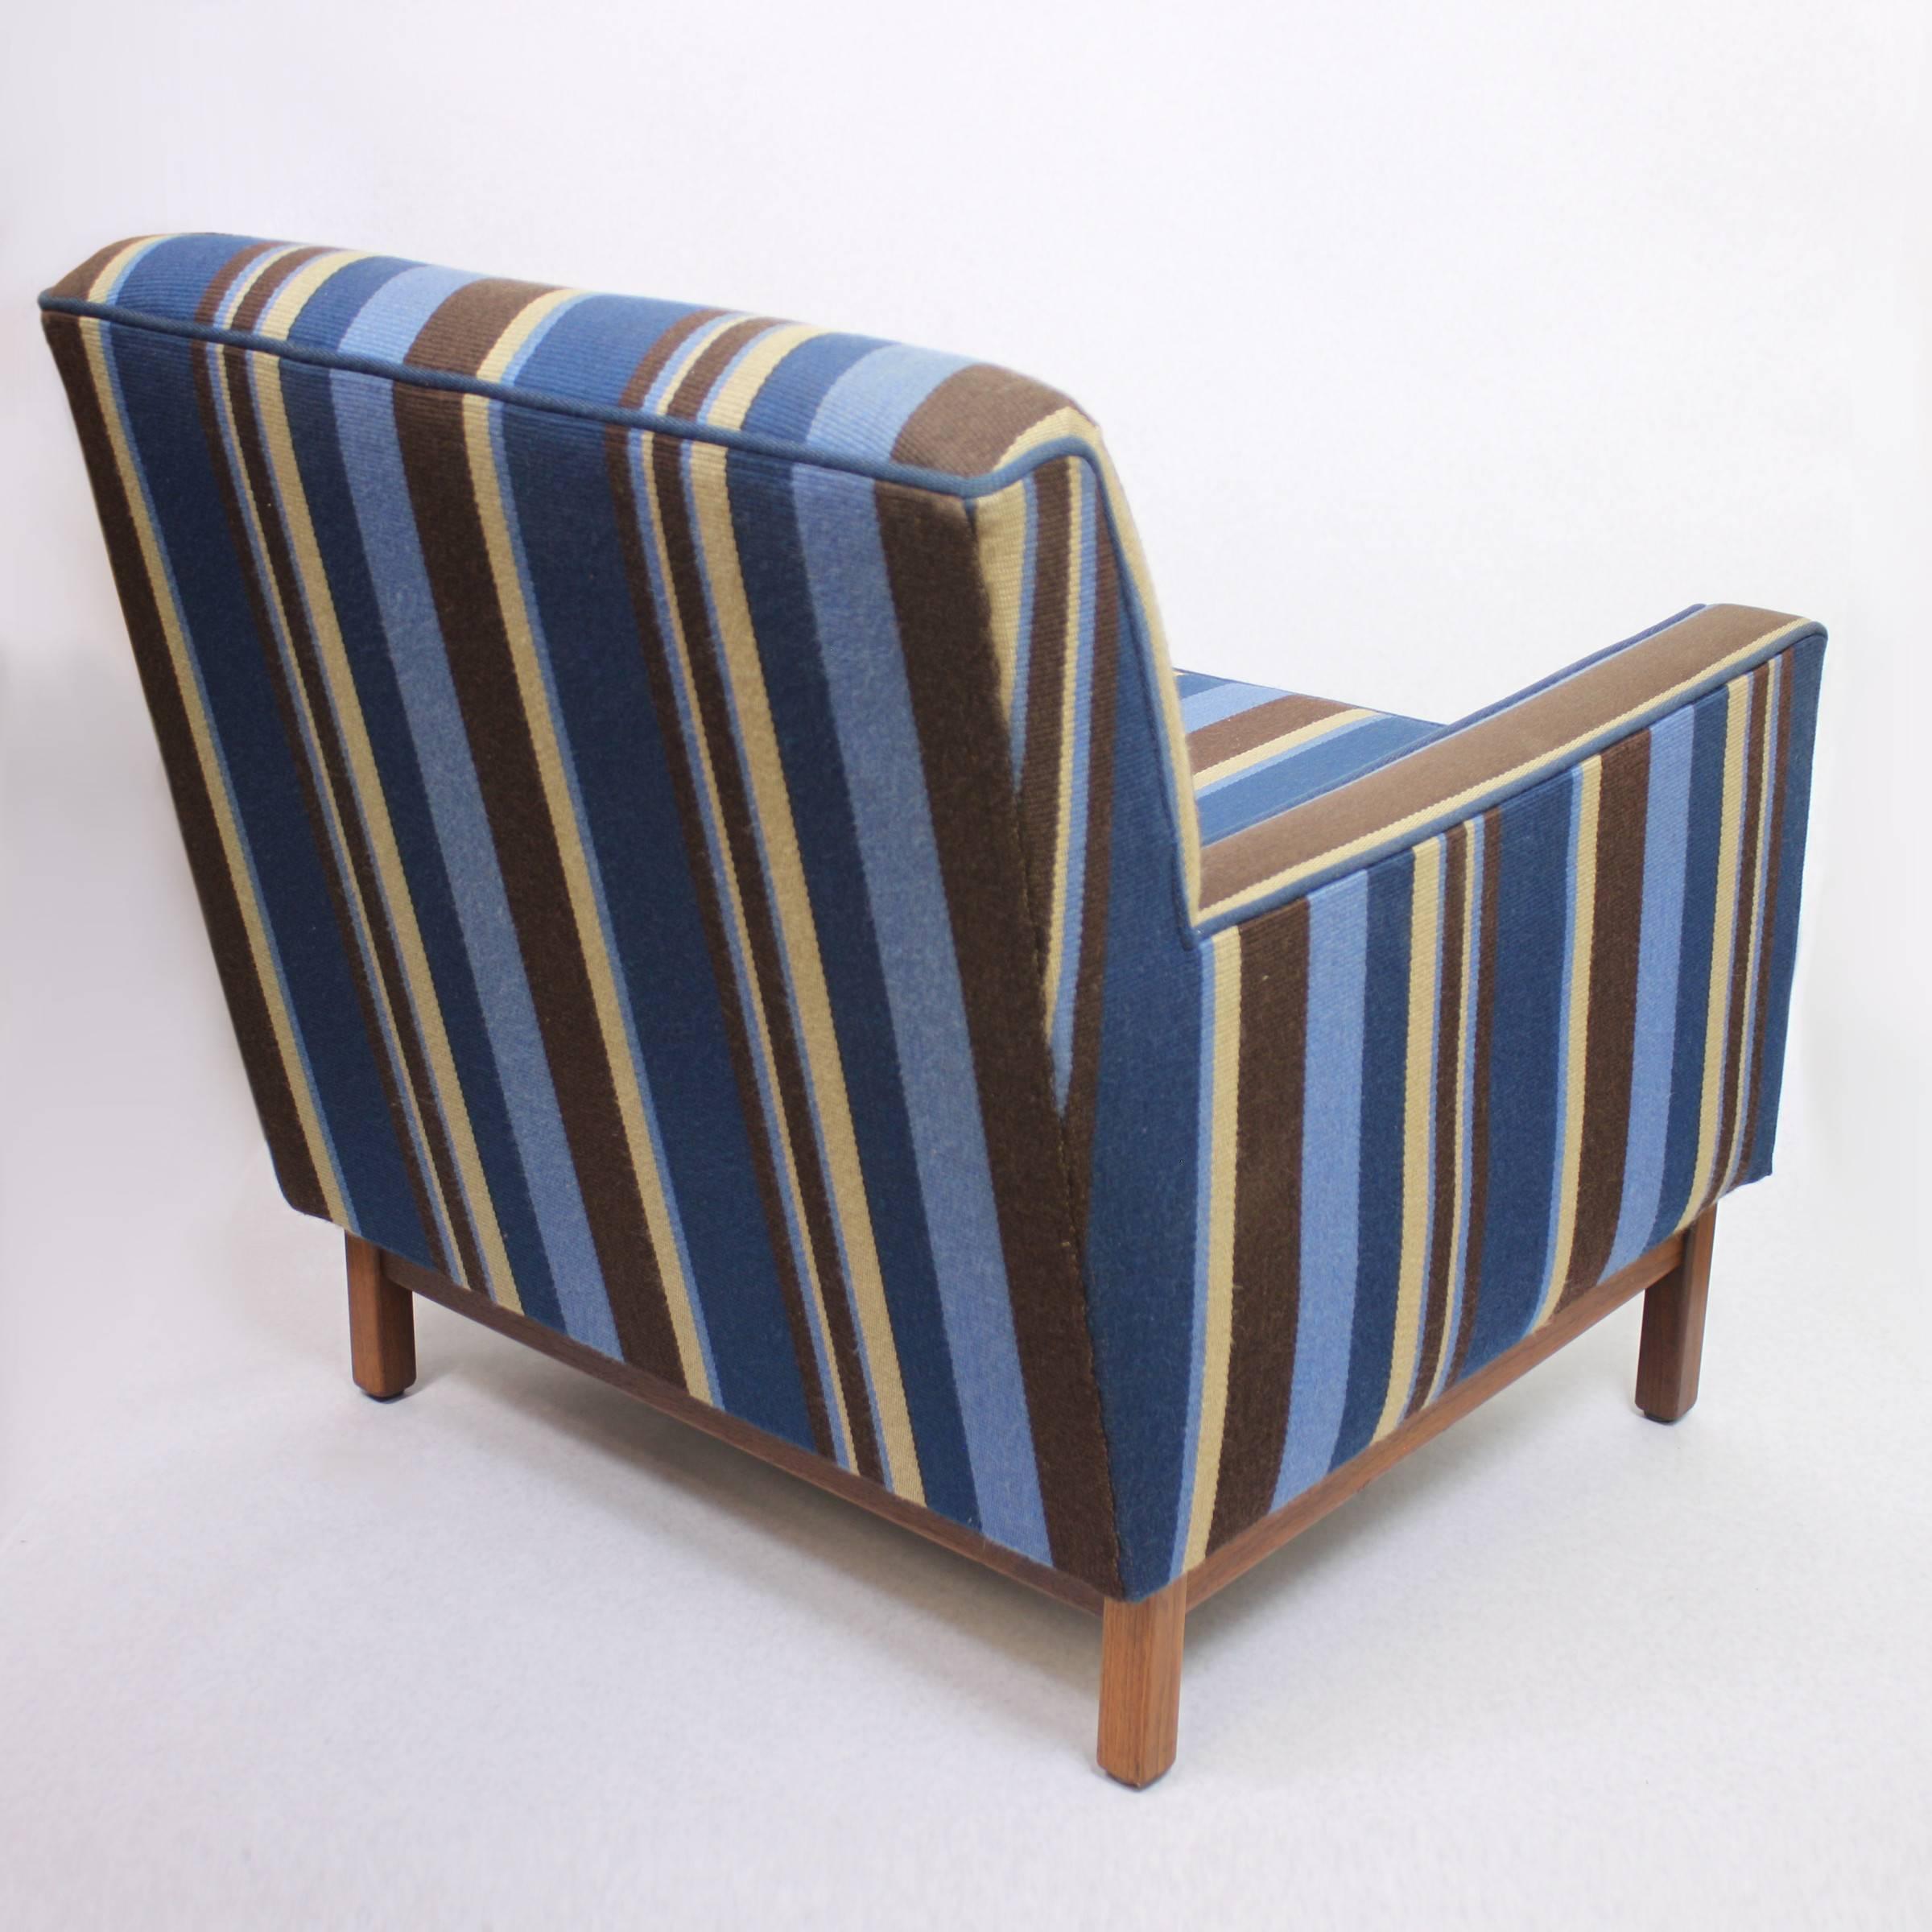 American Spectacular Pair of Mid-Century Modern Blue Striped Lounge Chairs by Gunlocke